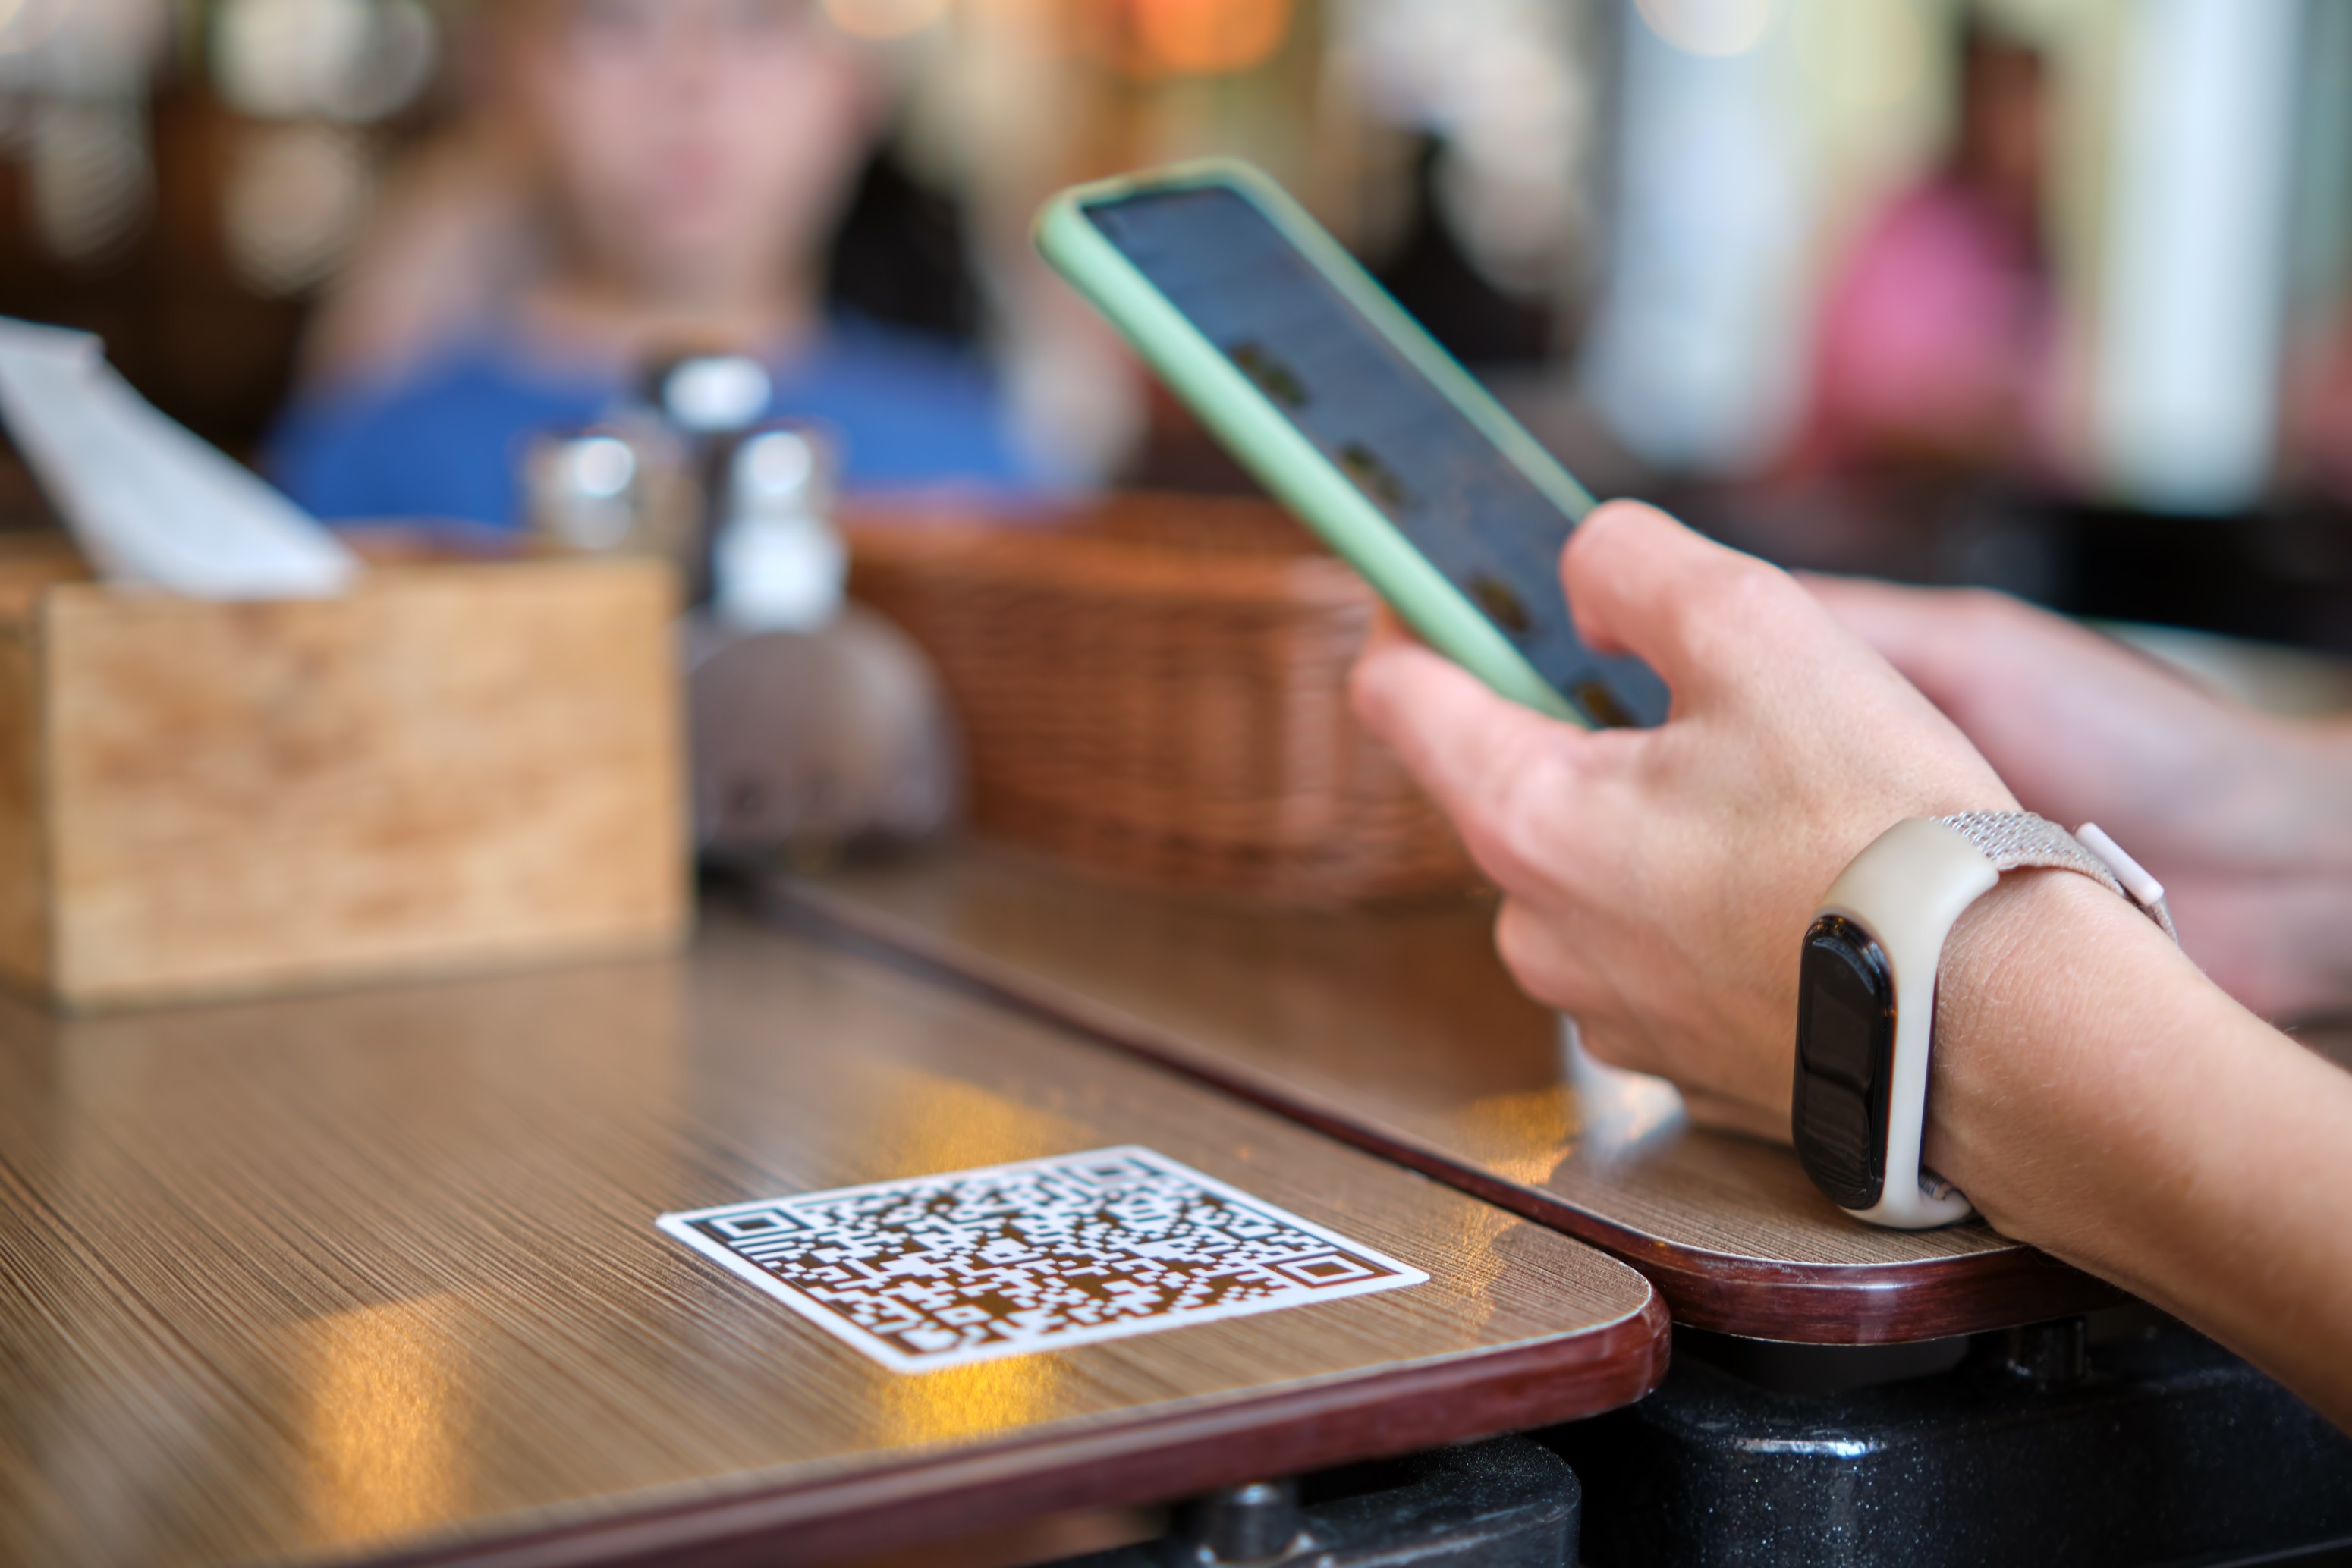 The Office of the Privacy Commissioner for Personal Data raised concerns about restaurants collecting customers’ data through their digital platforms including mobile apps or scanning QR codes. Photo: Shutterstock
